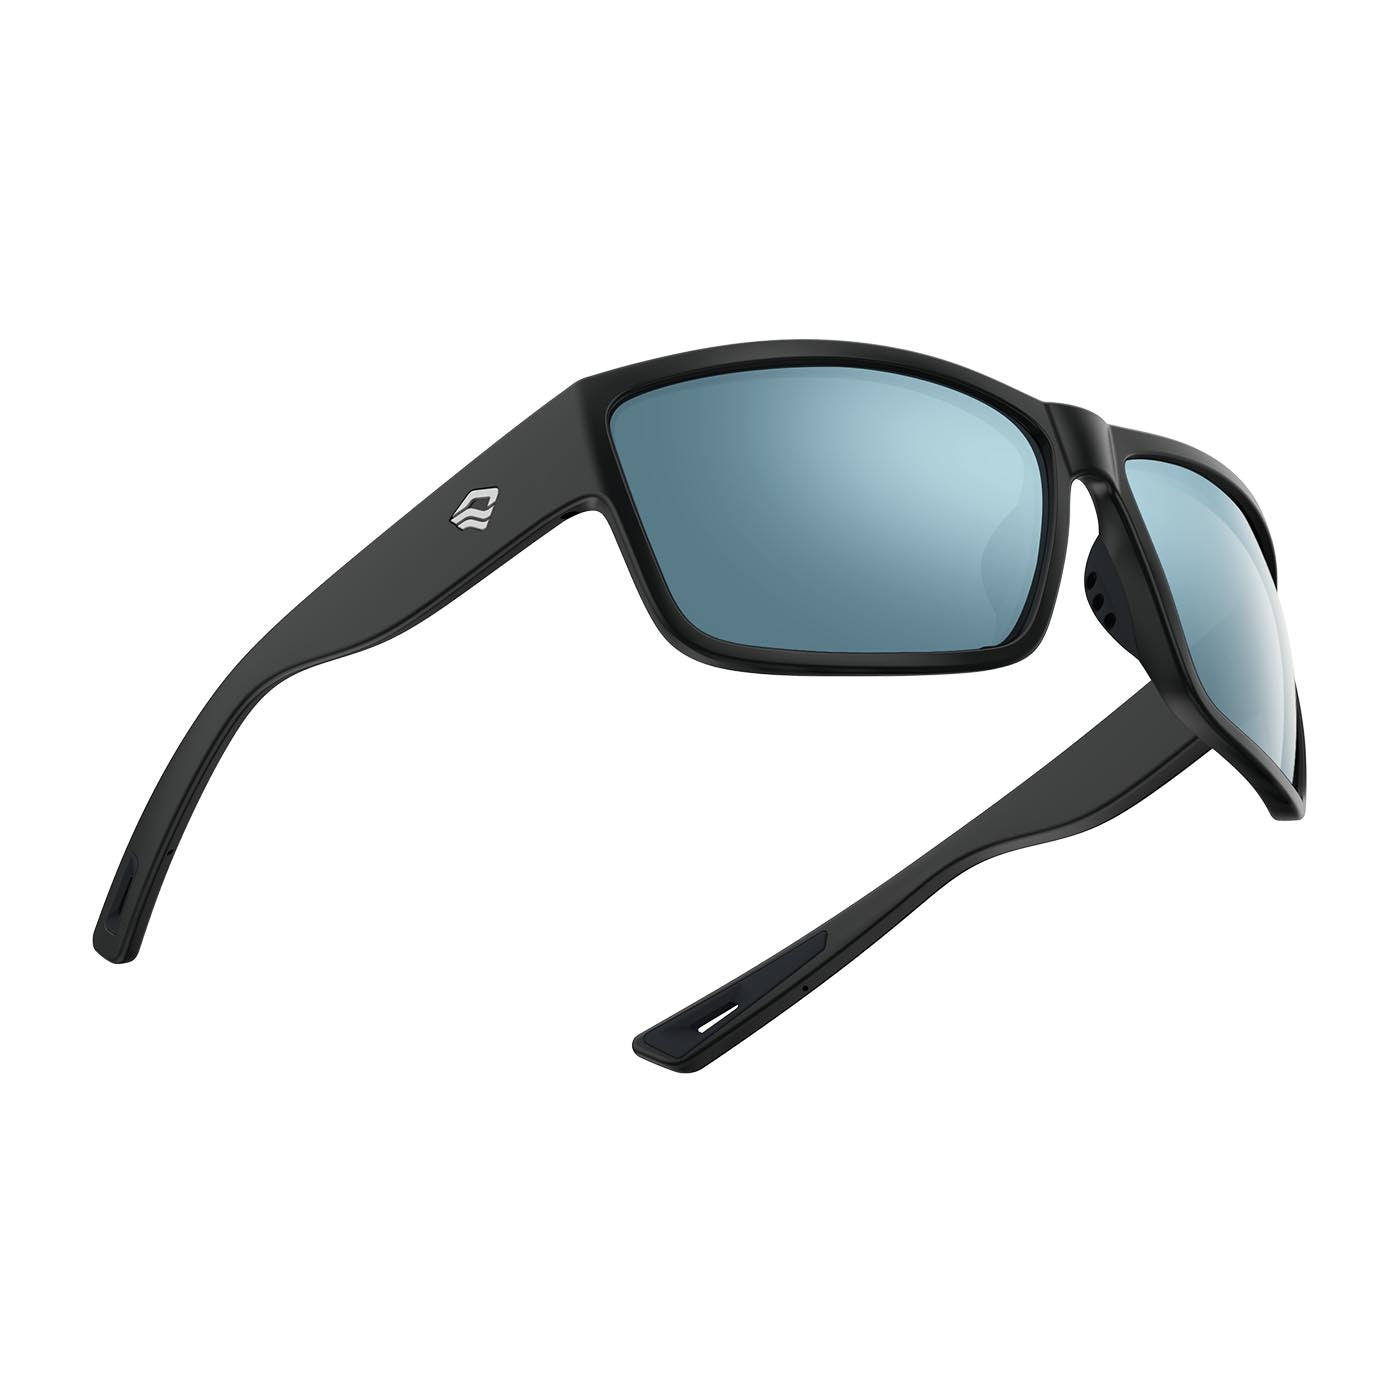 Wiley X Covert Sunglasses with Polarized Blue Mirror Lens